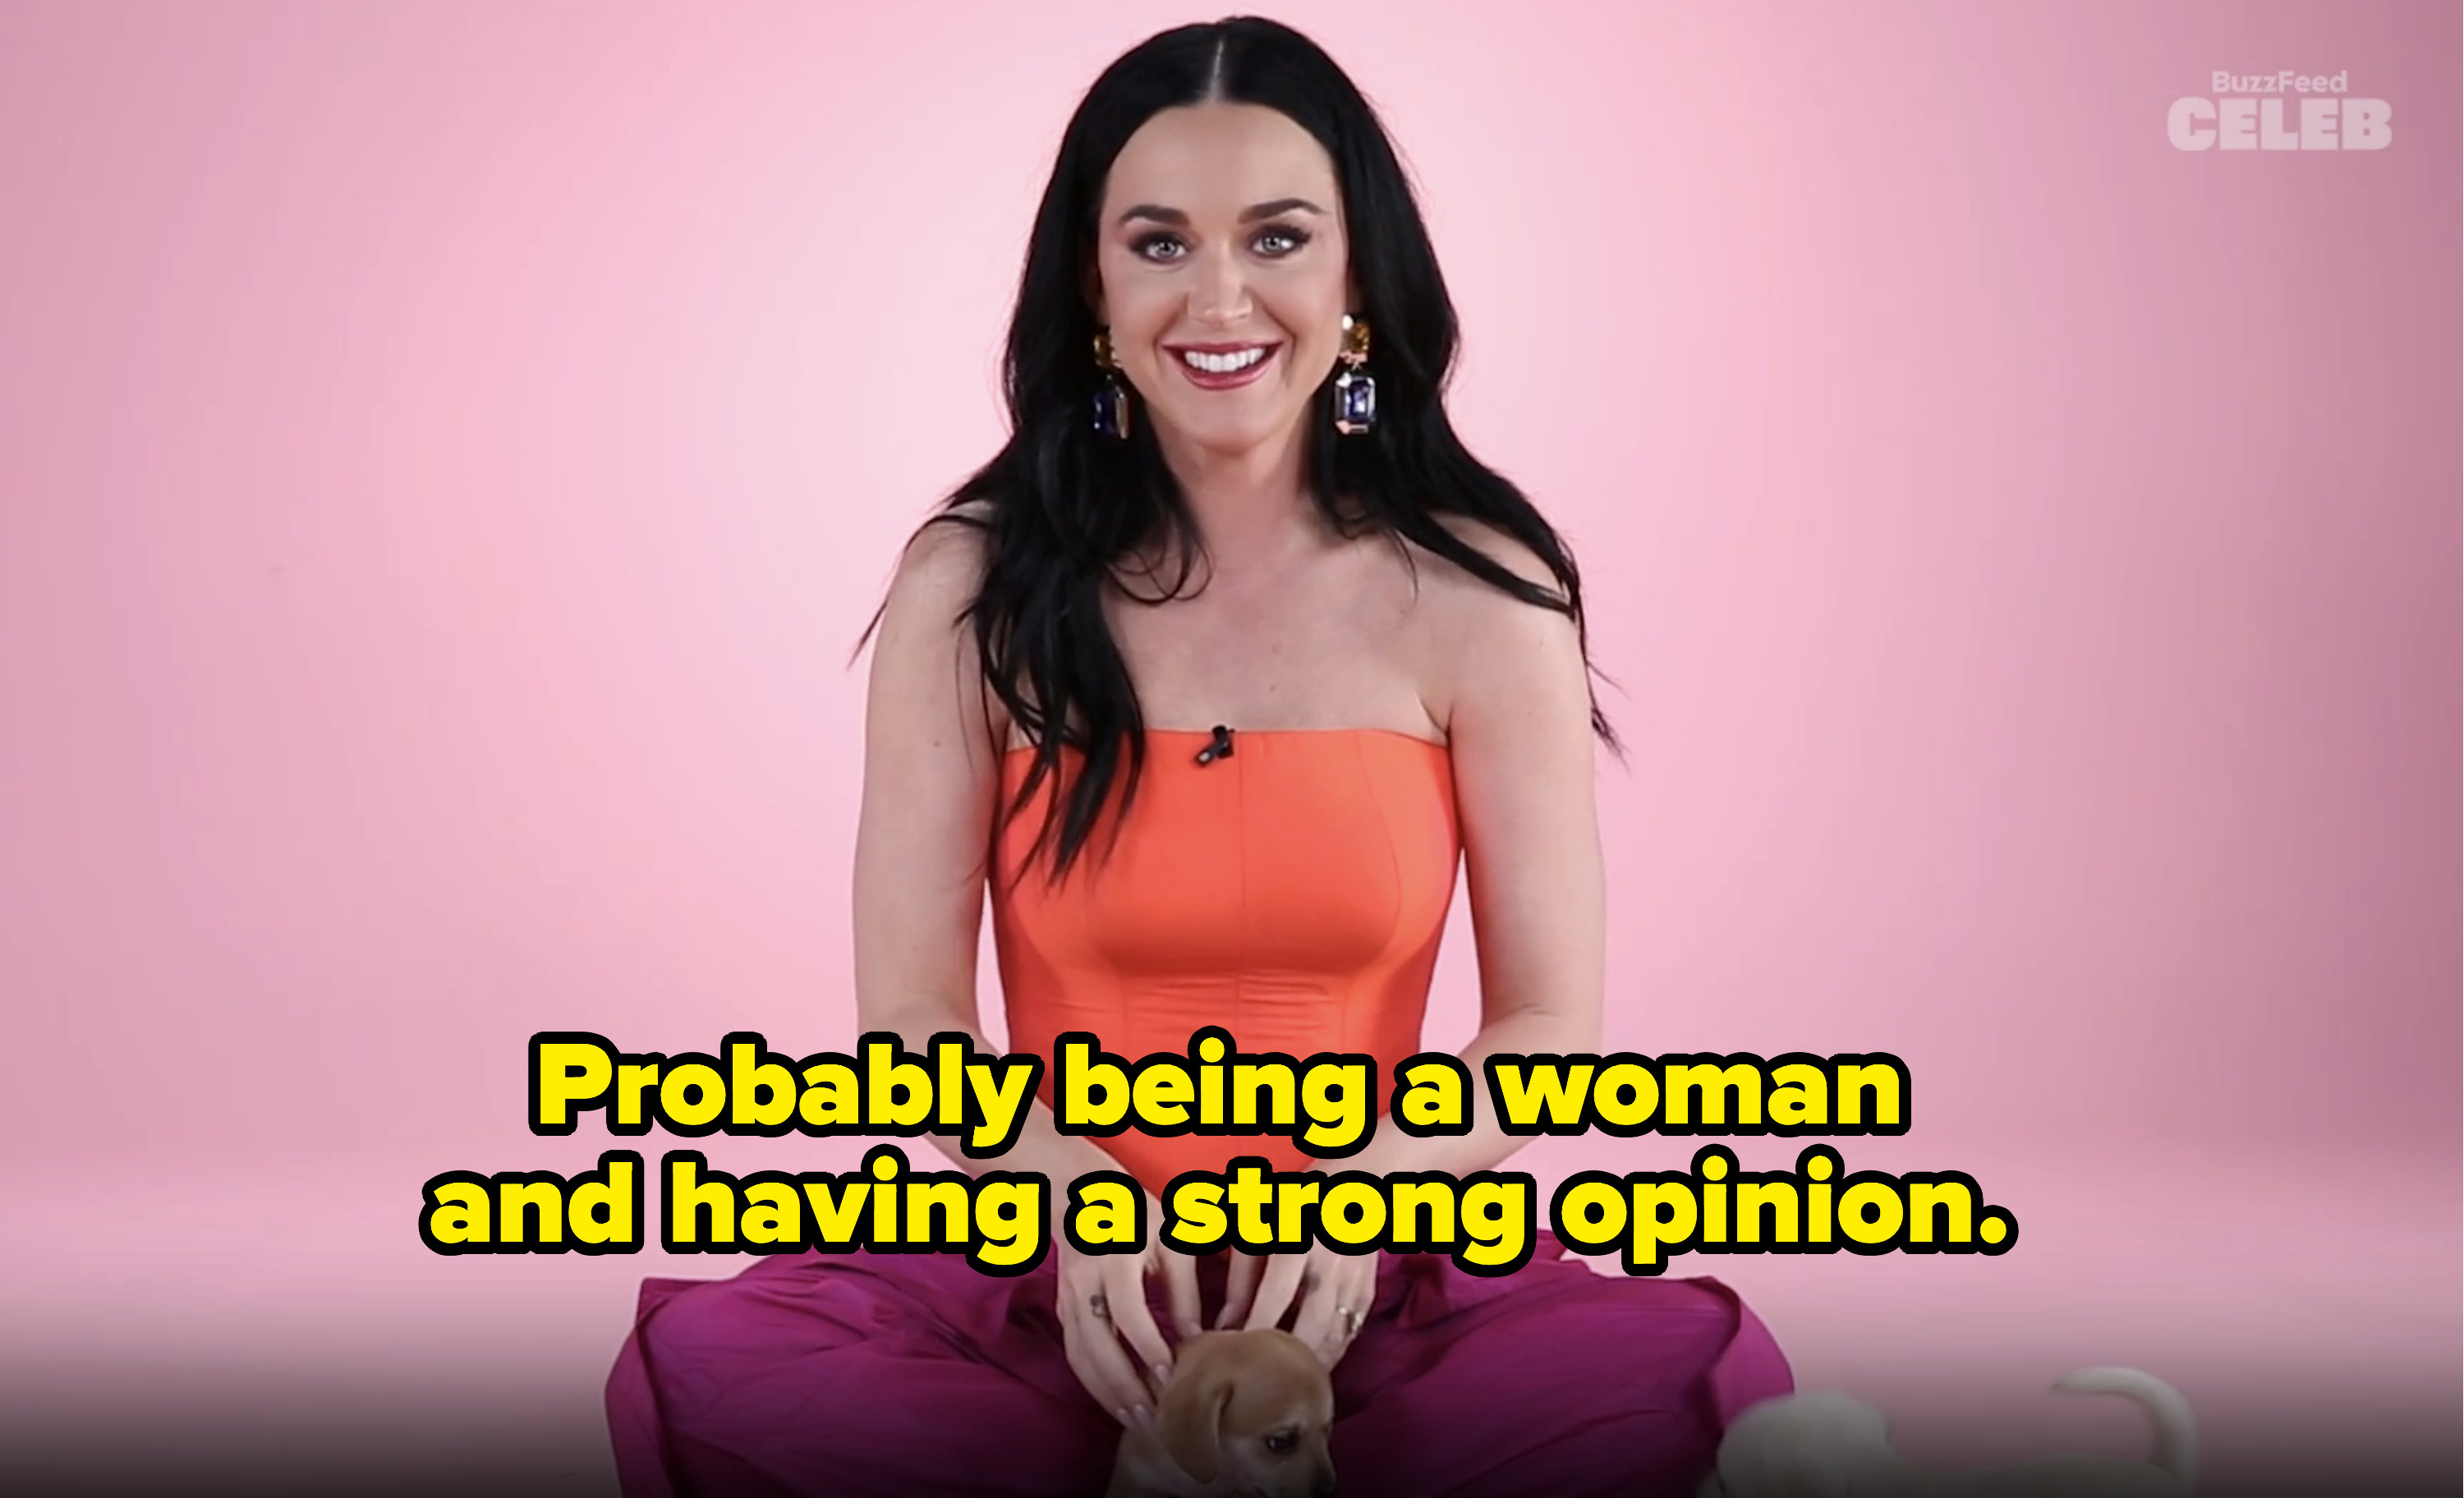 &quot;Probably being a woman and having a strong opinion.&quot;